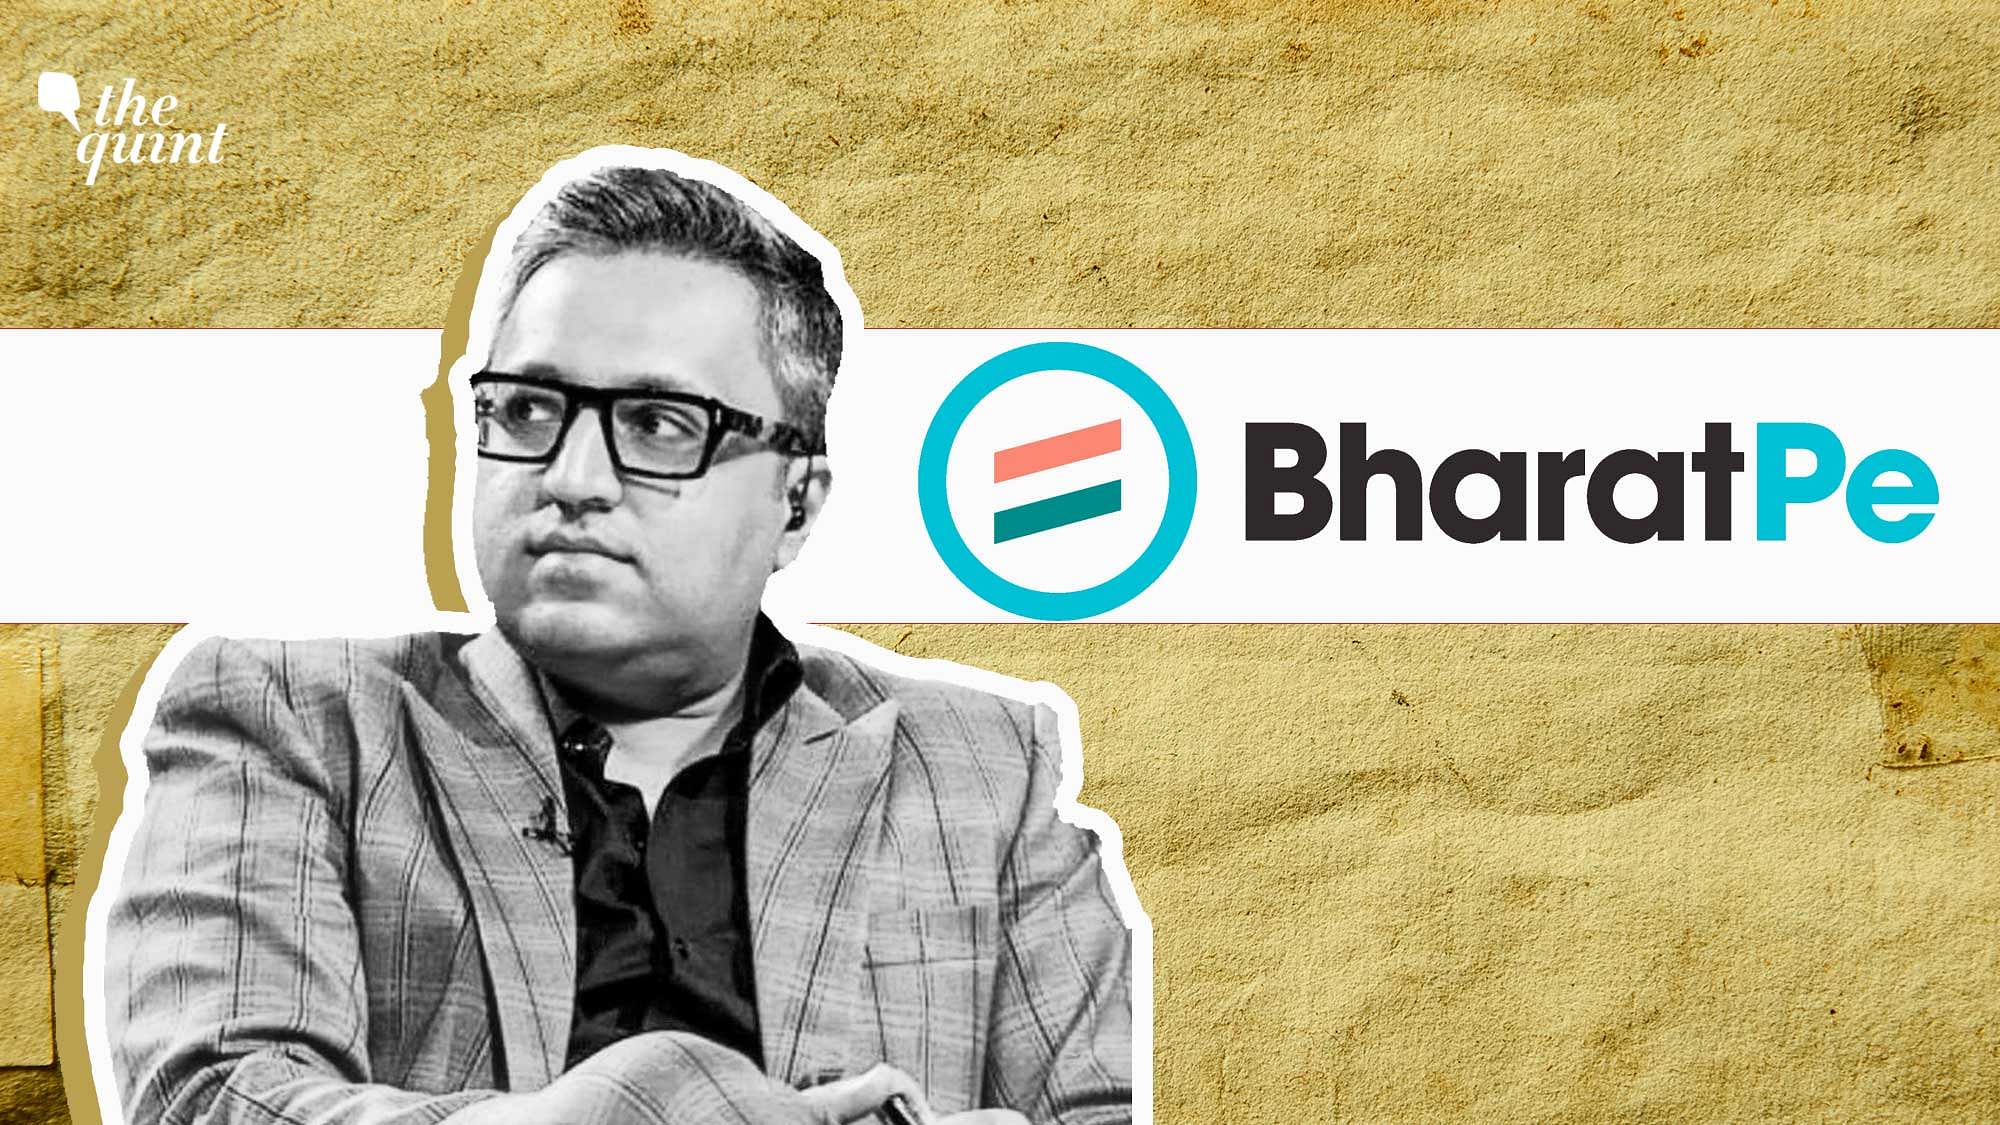 <div class="paragraphs"><p>The controversy has put a spotlight on BharatPe and its troubled history.</p></div>